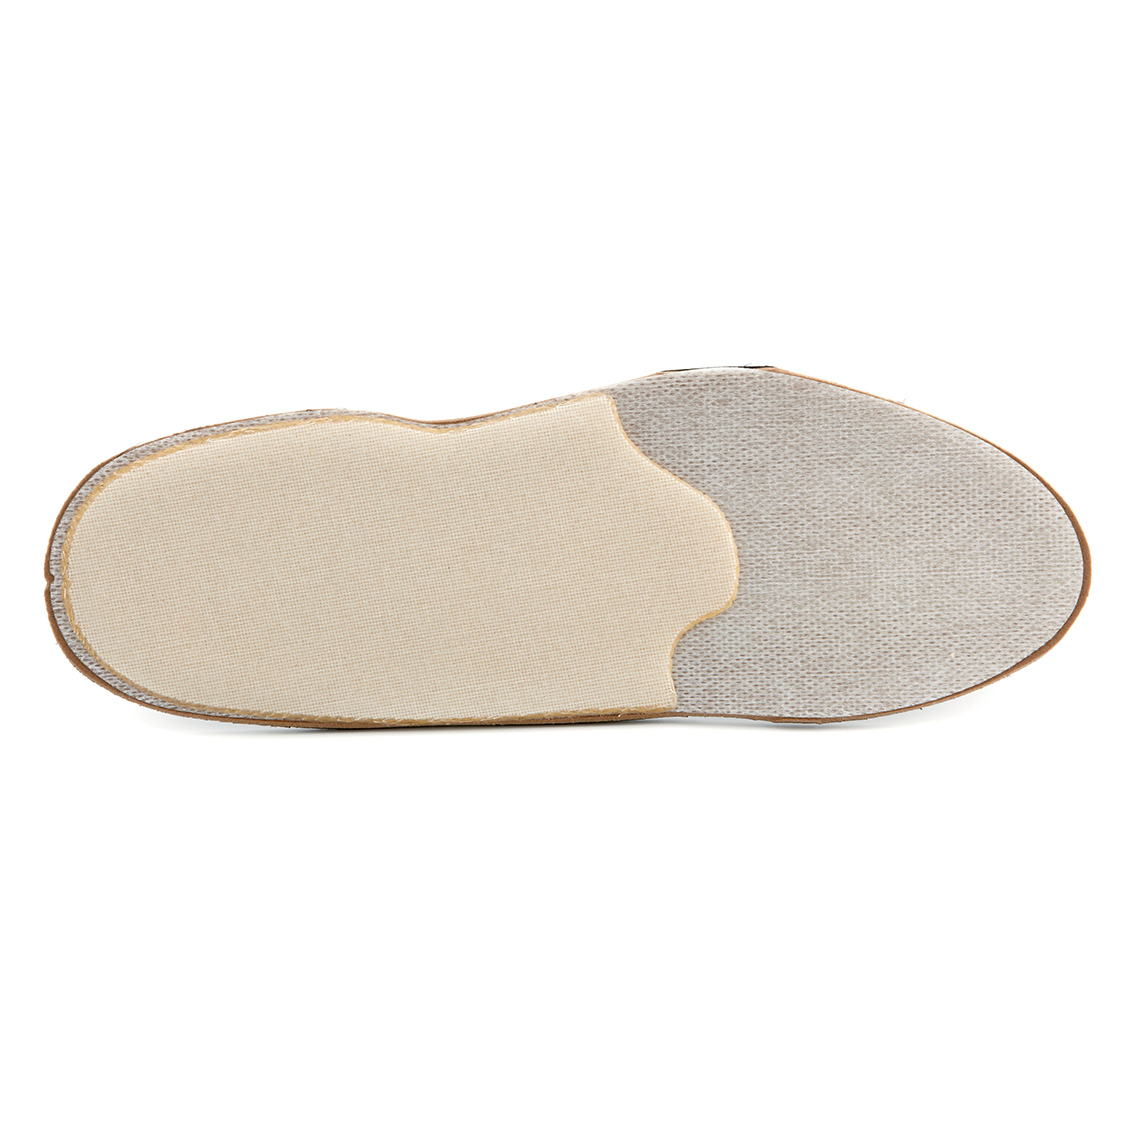 Semi-finished Diabet insole for sensitive feet in Resin for thermoforming Women Size 38/39 1 pair